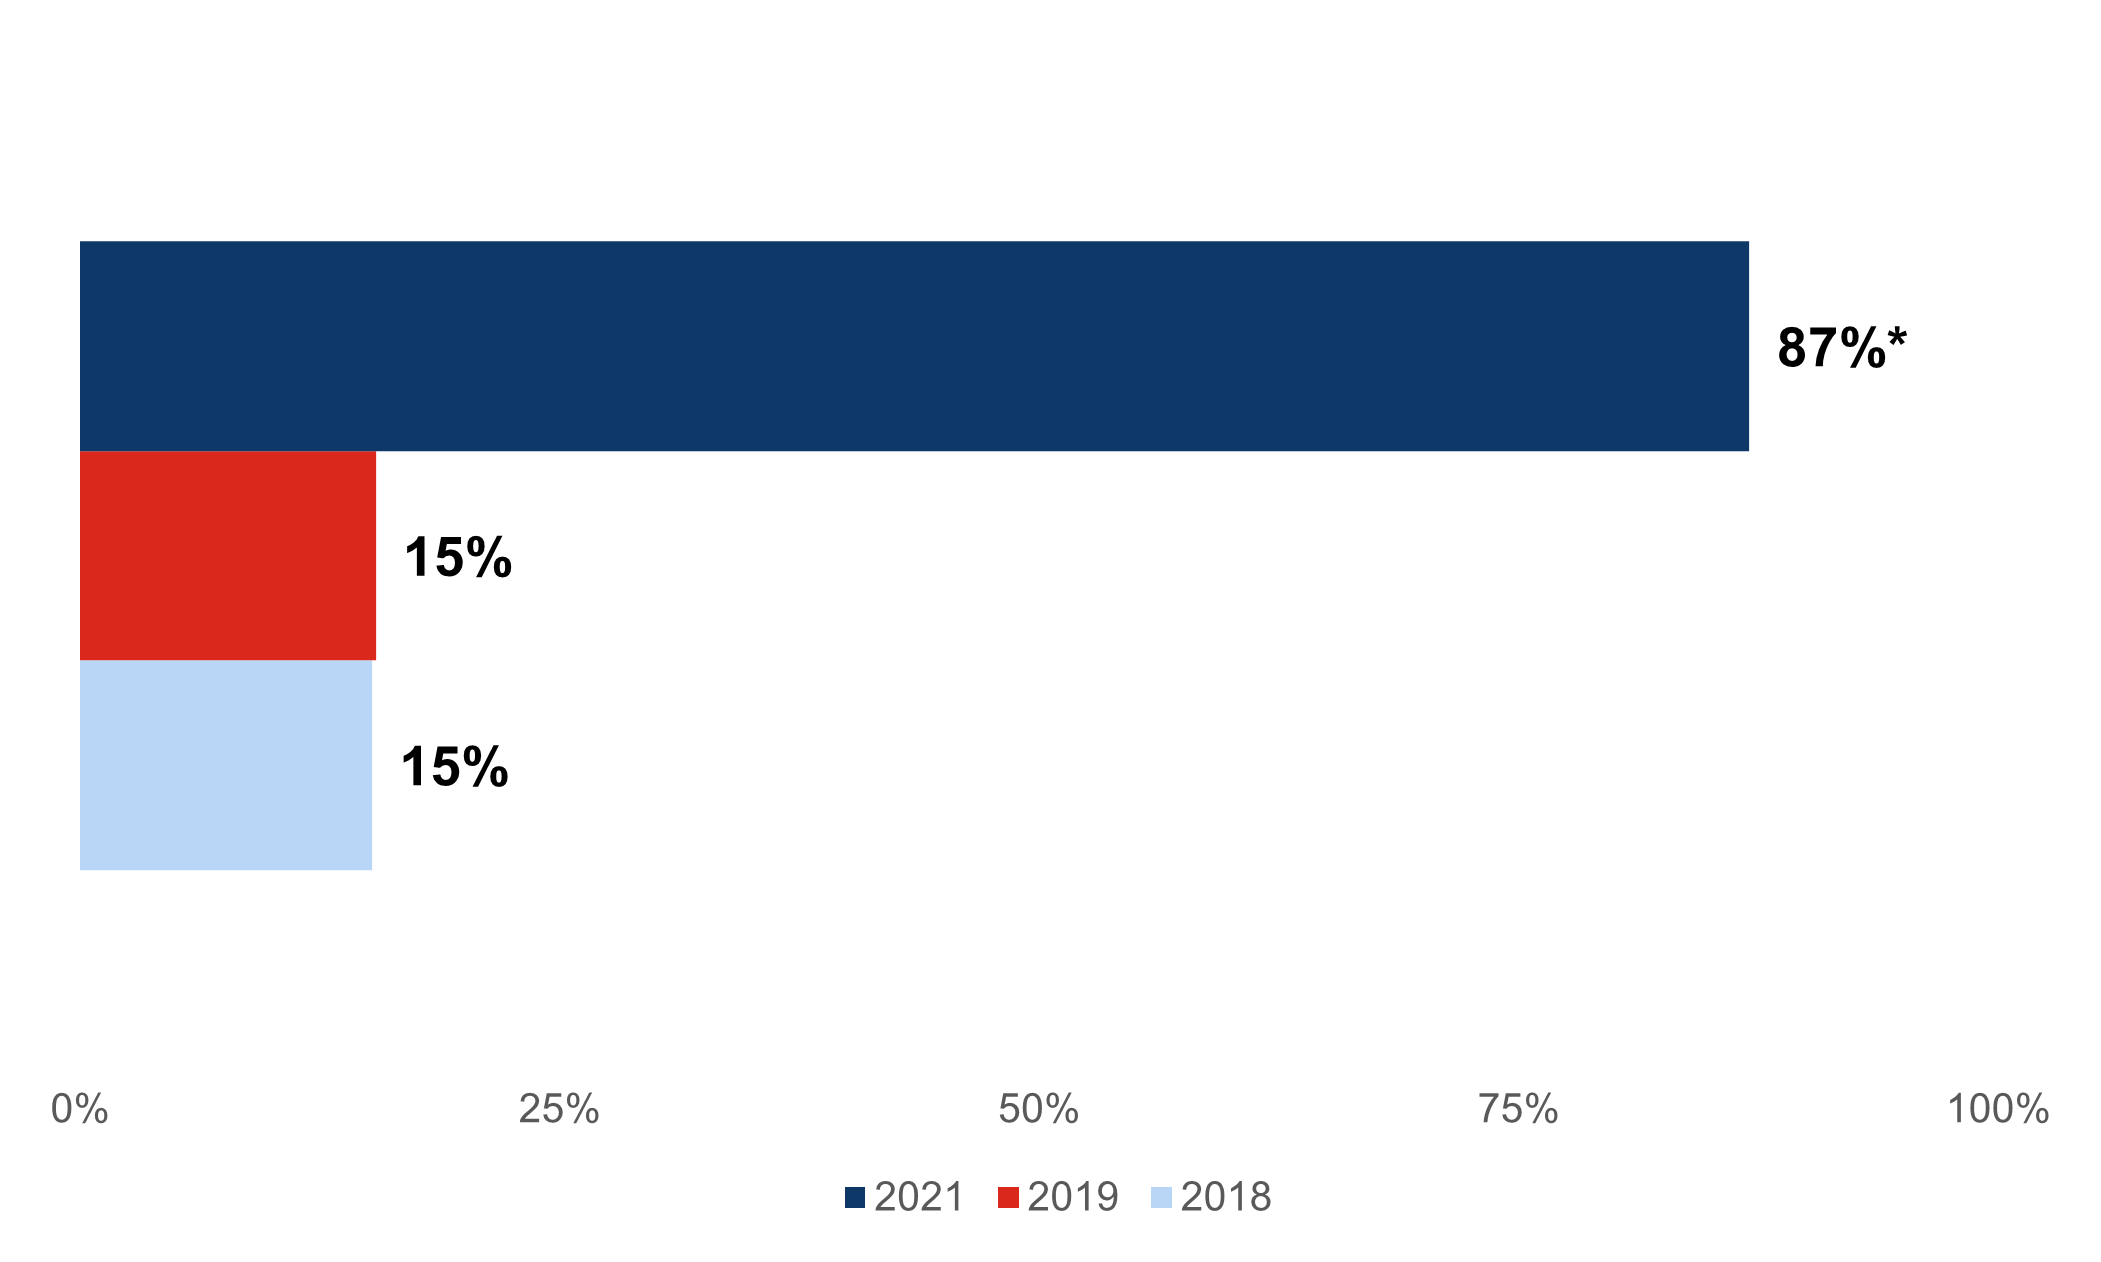 Figure showing a bar graph showing the precent of office-based physicians that used telemedicine from 2018 to 2021. In 2018 (15%), in 2019 (15%), and in 2021 (87%).